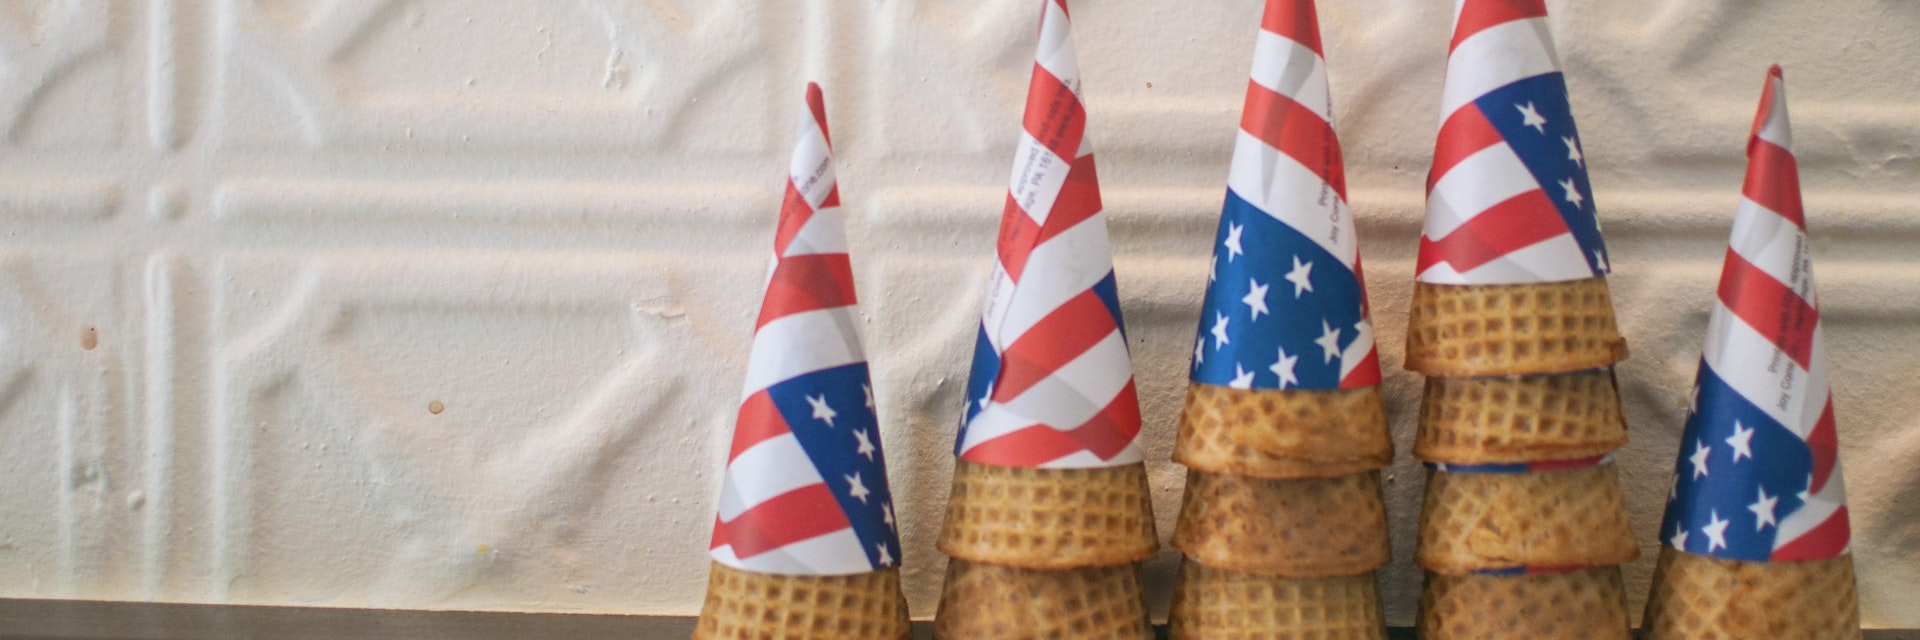 Brooklyn Ice Cream Factory dresses its staff and cone holders in the stars and stripes of the American flag.